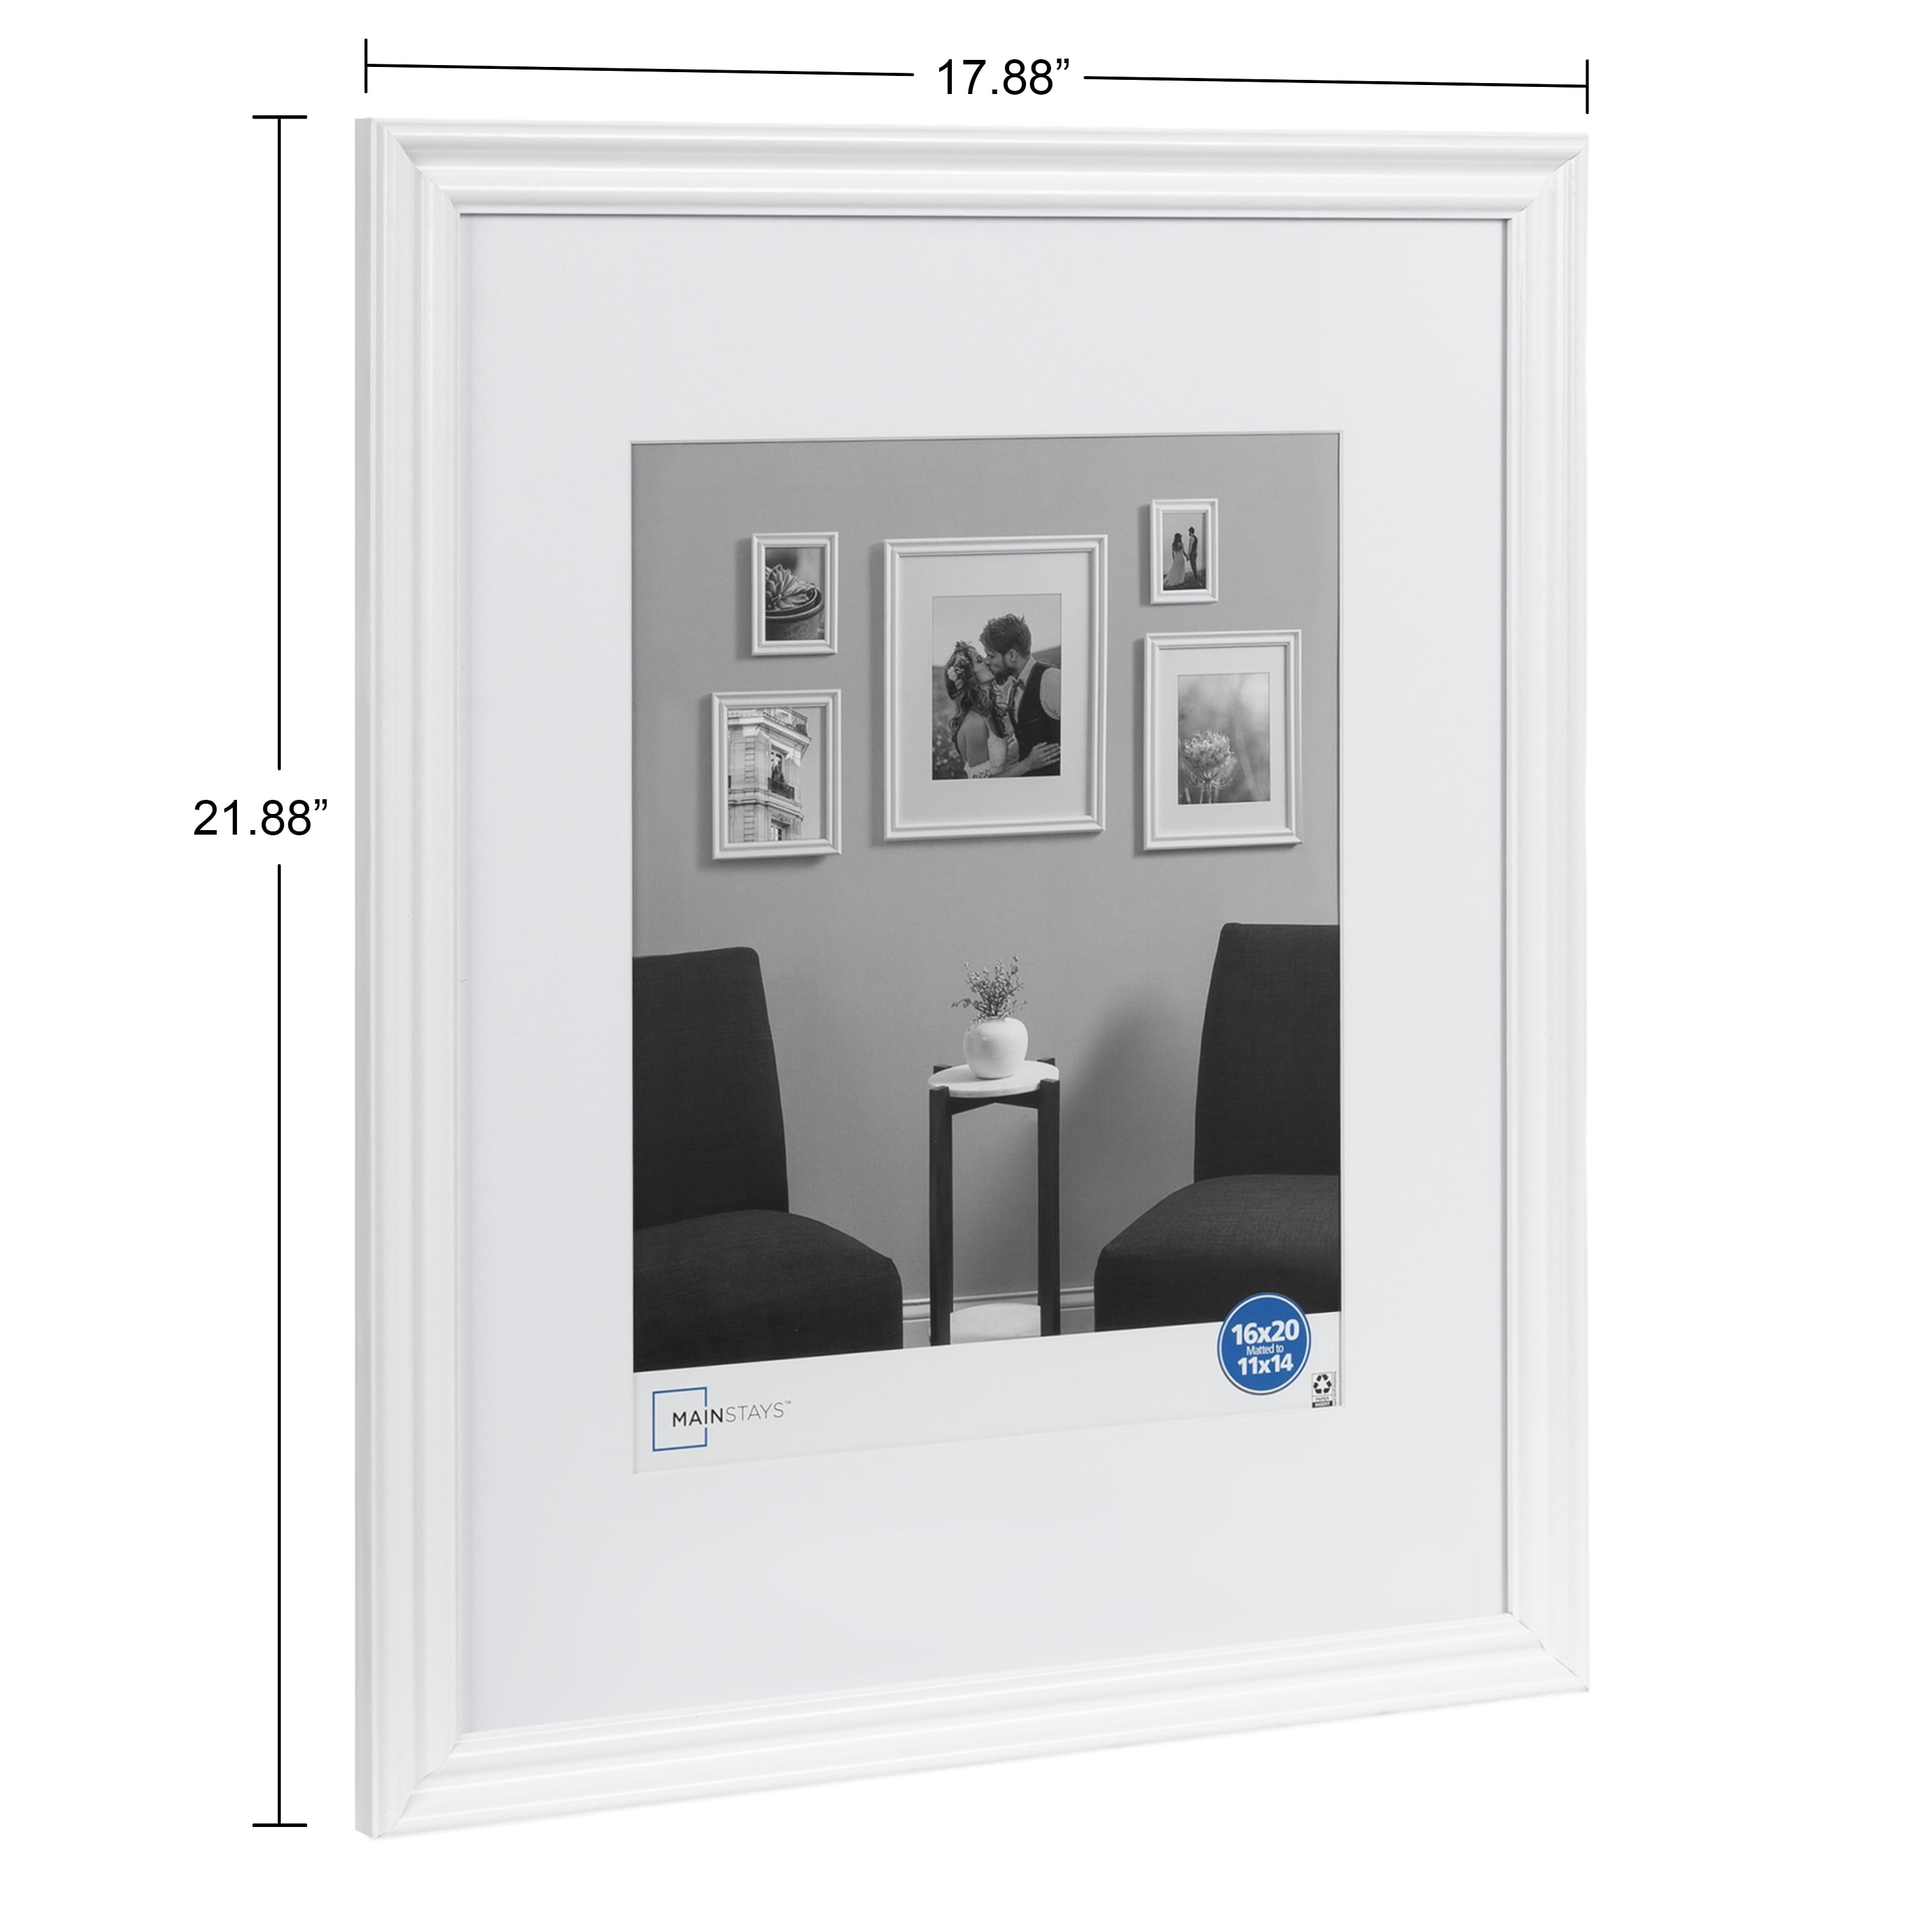 Maintsays 16x20 Matted to 11x14 Traditional Gallery Wall Picture Frame, Black